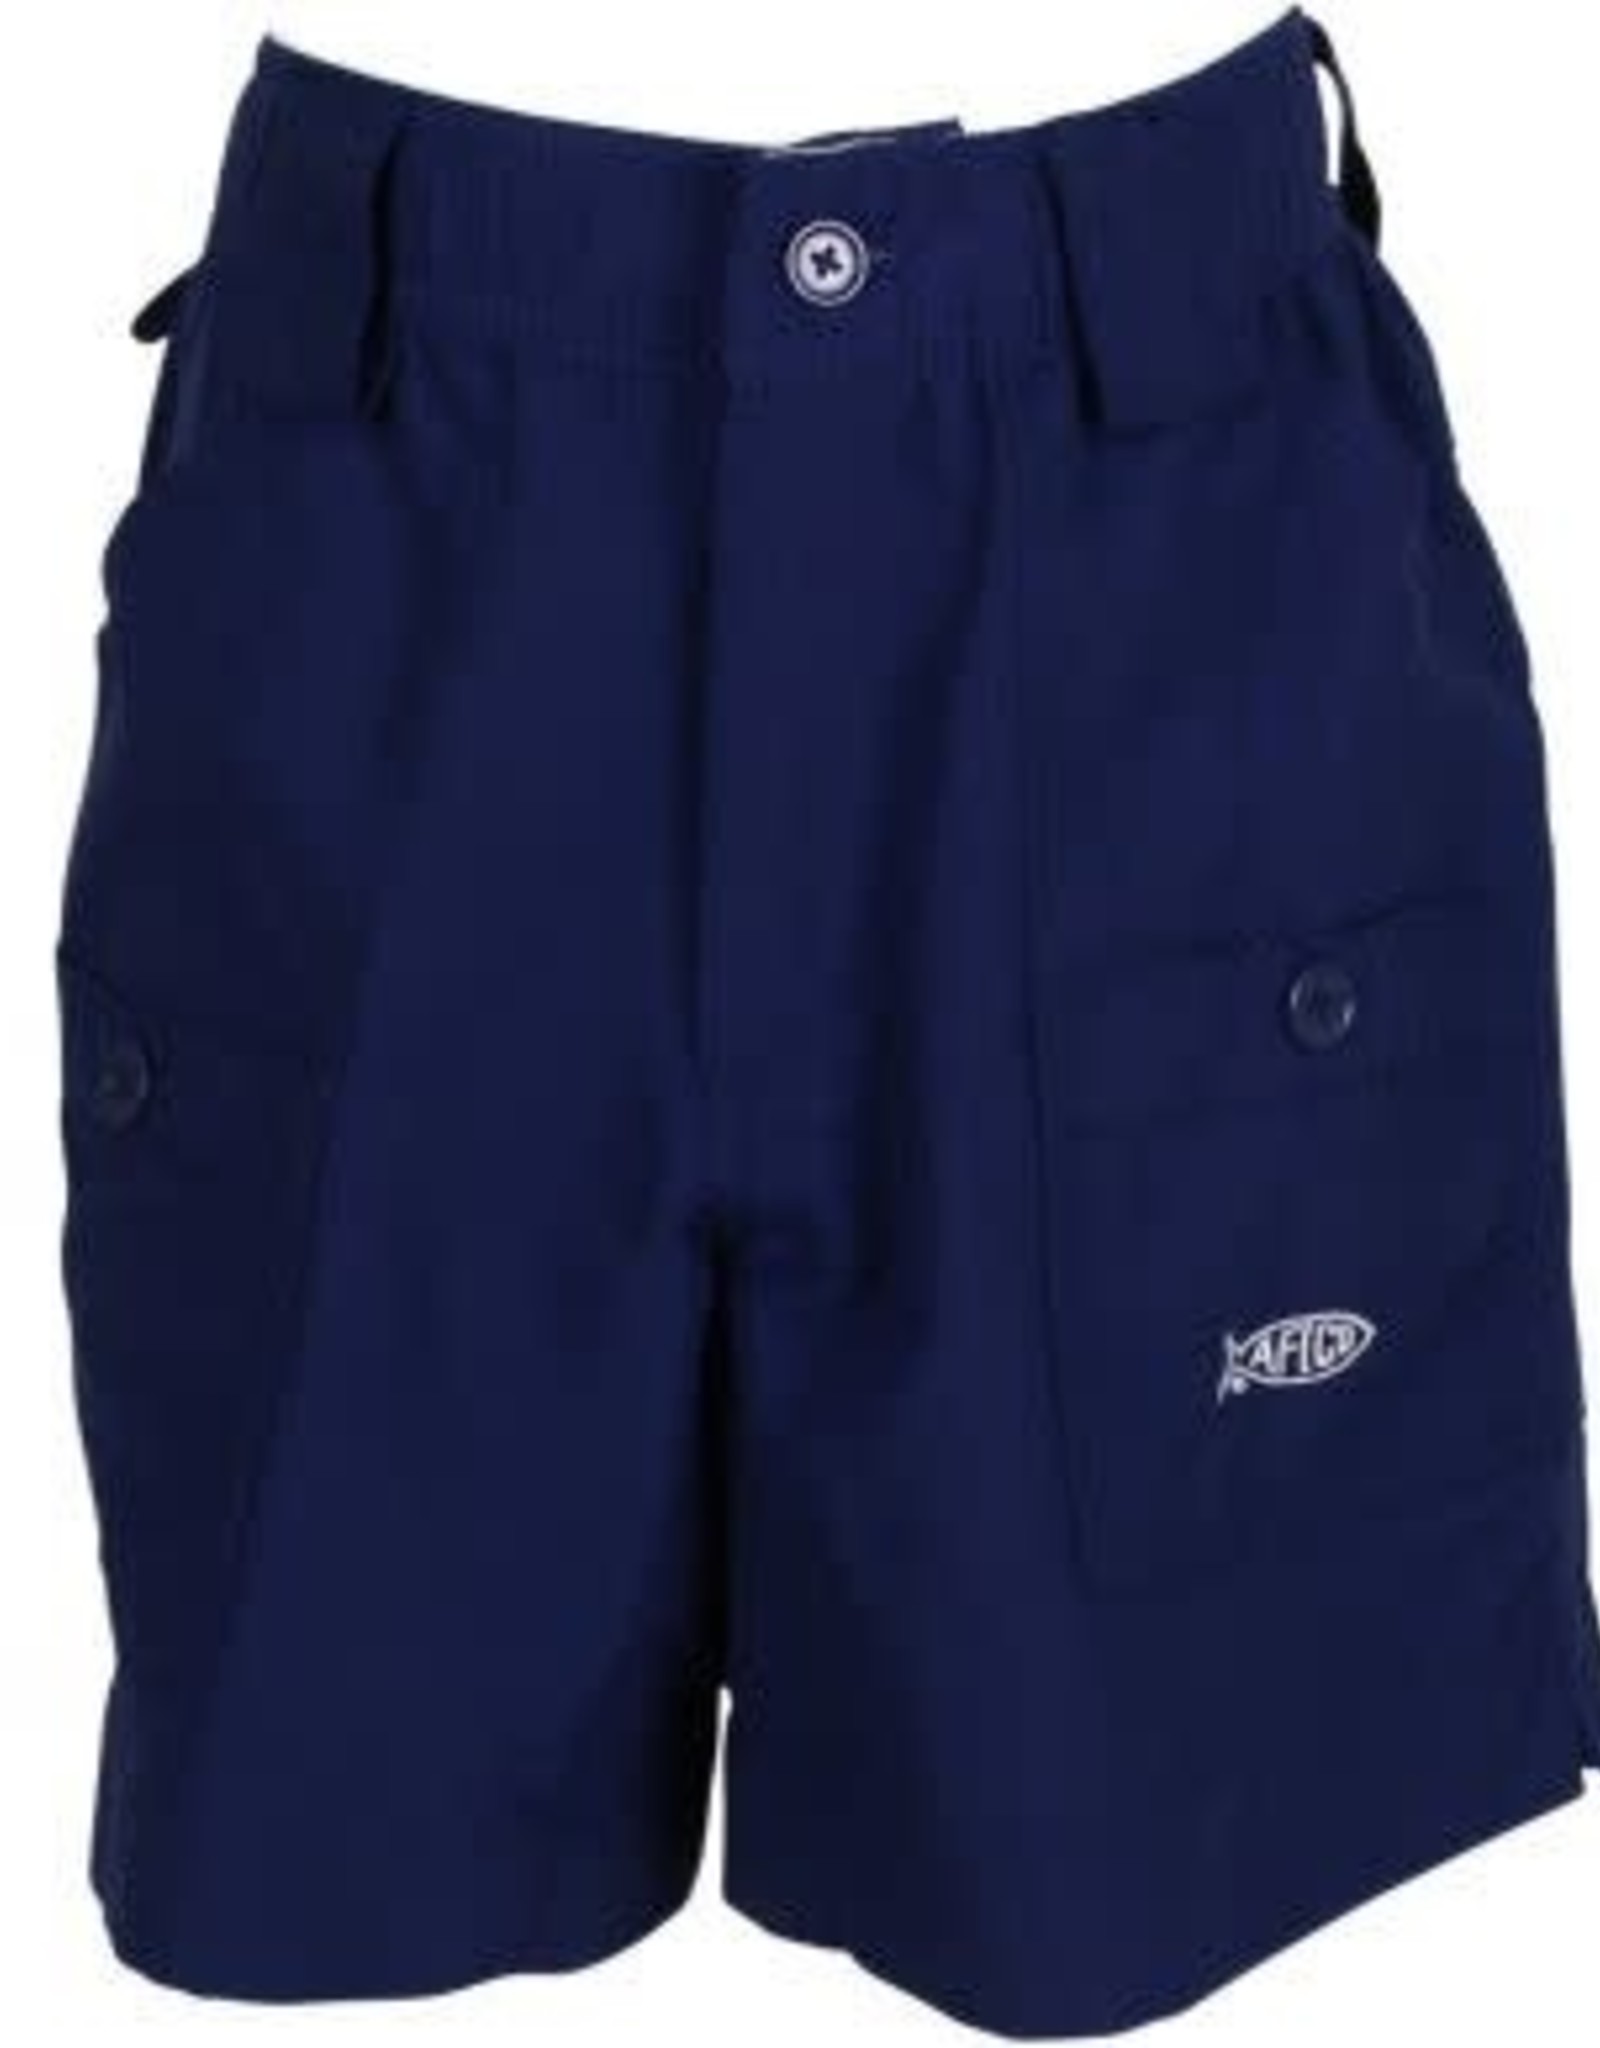 AFTCO B01 - Youth Fishing Short